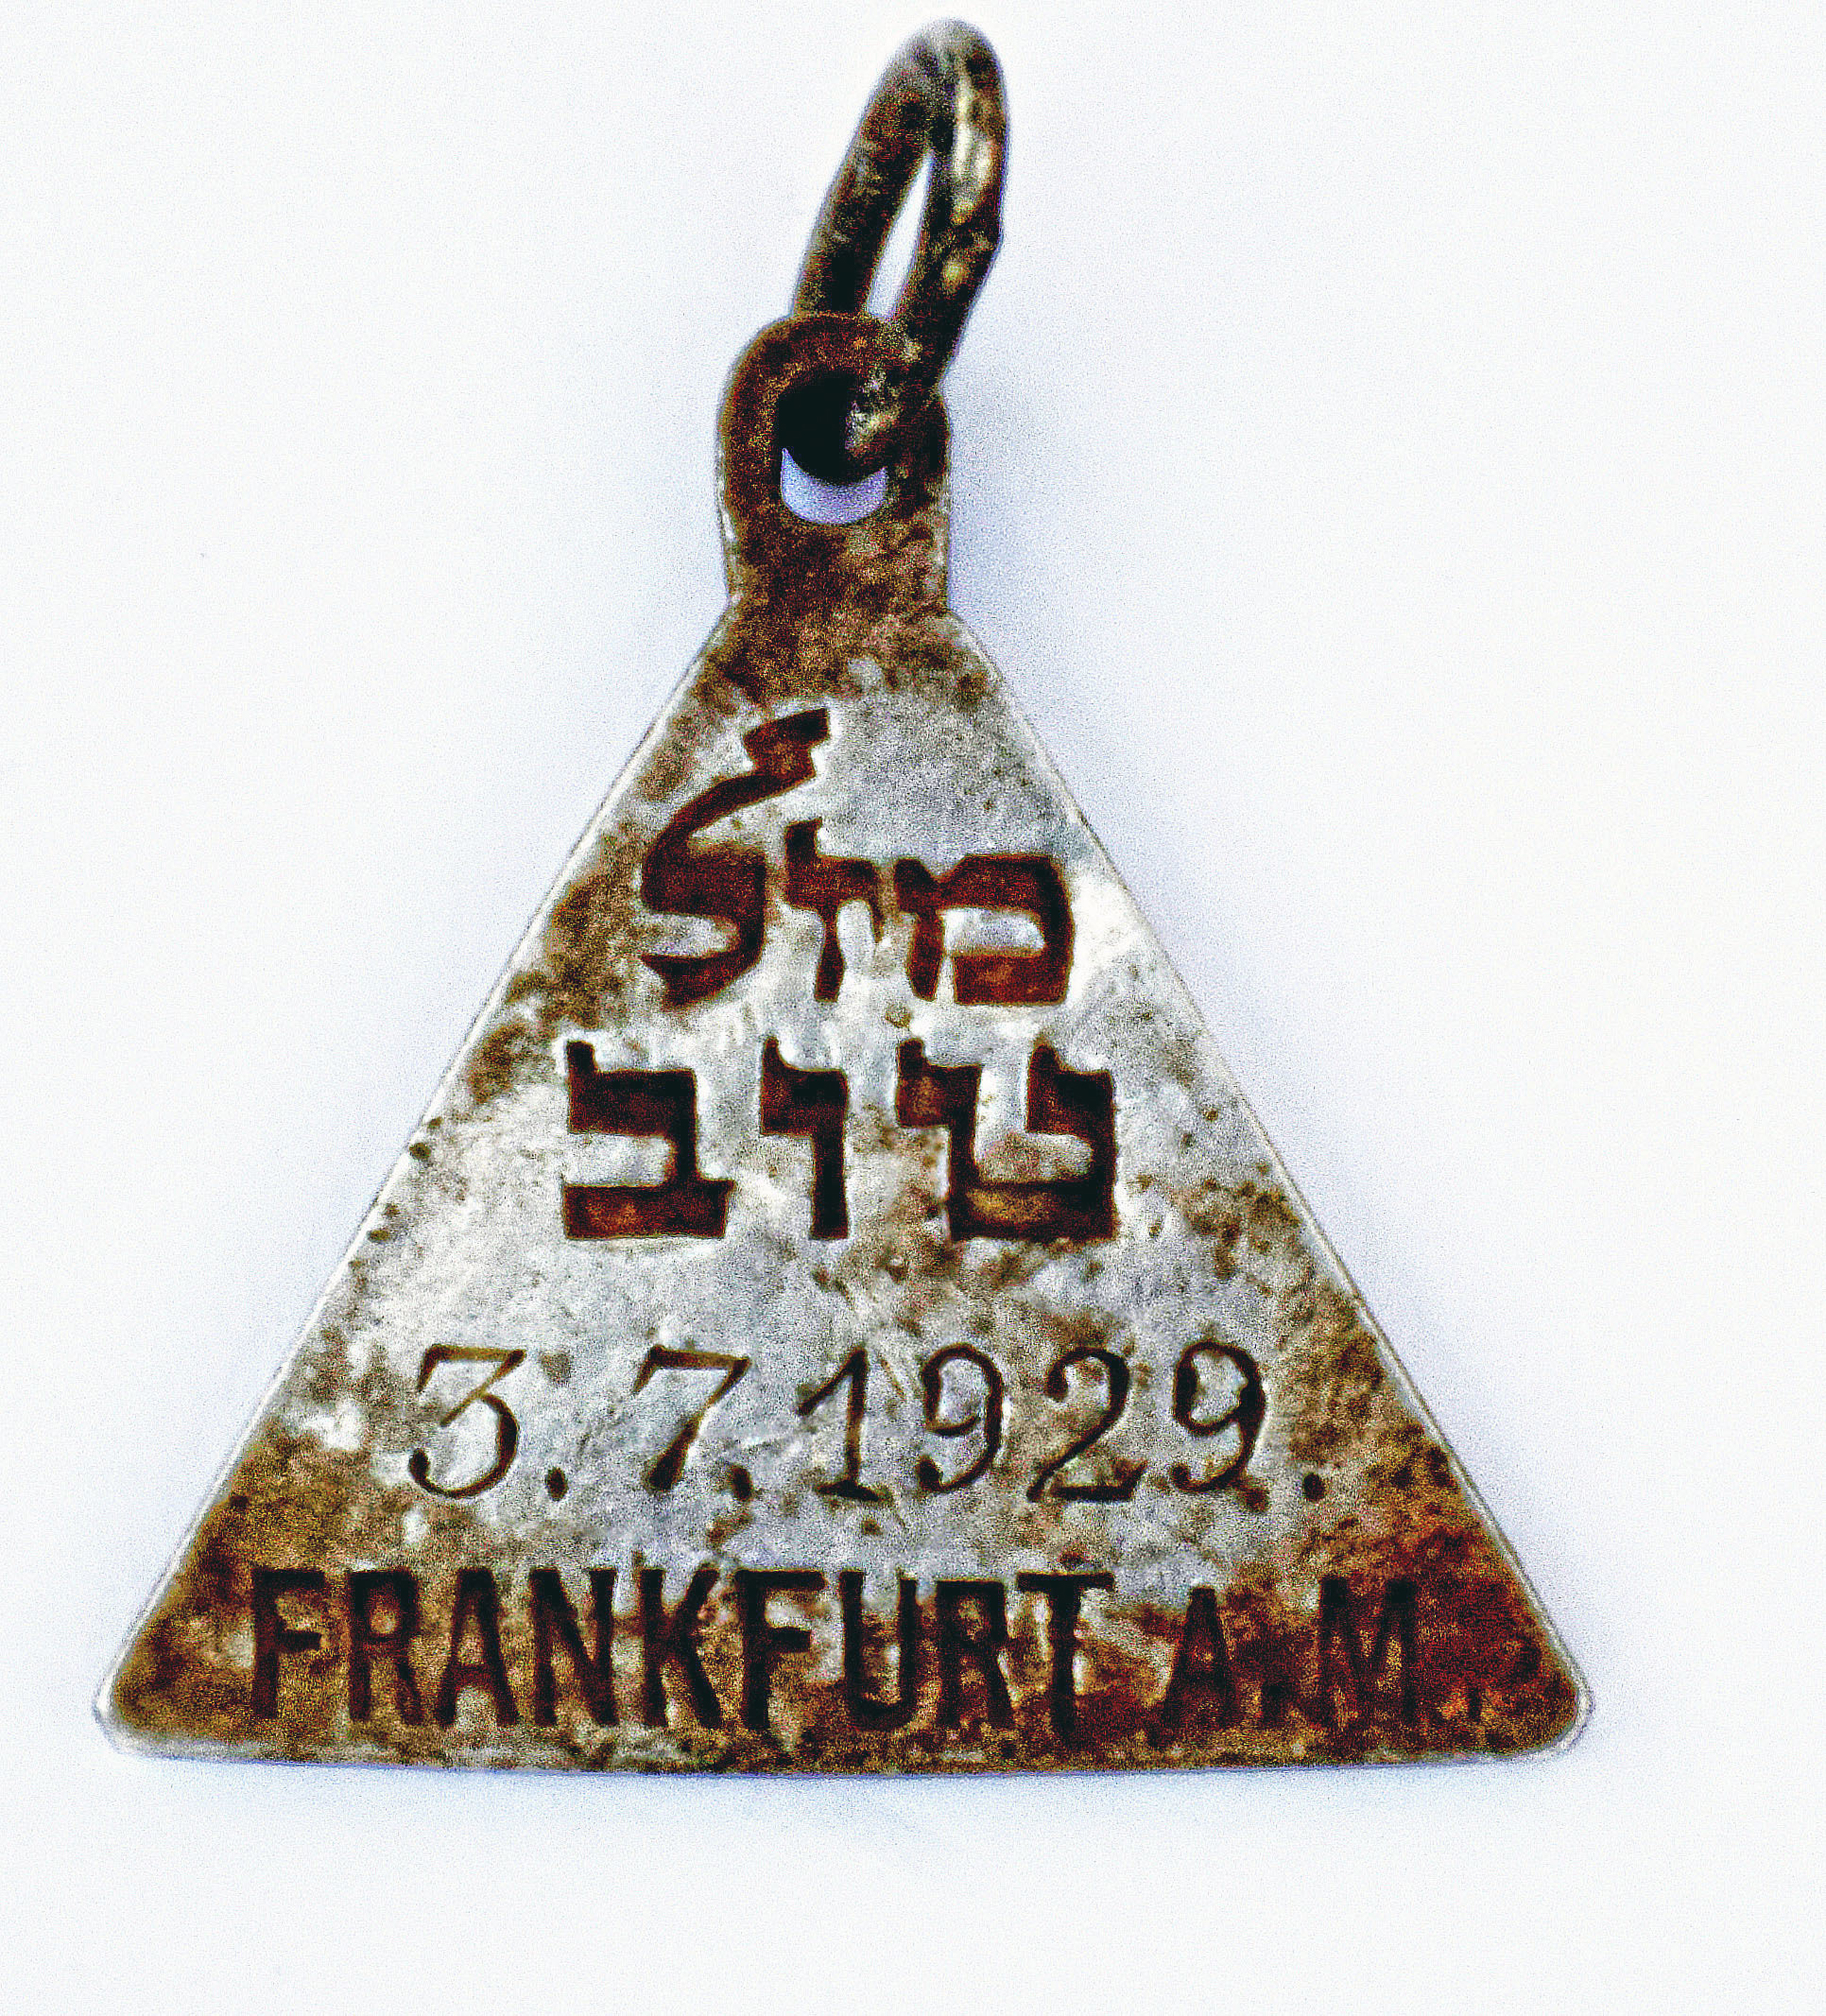 This undated photograph released by the Israel Antiquities Authority shows a pendant that appears identical to one belonging to Anne Frank, Israel's Yad Vashem Holocaust memorial said Sunday. Yad Vashem says it has ascertained the pendant belonged to Karoline Cohn _ a Jewish girl who perished at Sobibor and may have been connected to the famous diarist. Both were born in Frankfurt in 1929 and historians have found no other pendants like theirs. The triangular piece found has the words "Mazal Tov" written in Hebrew on one side along with Cohn's date of birth and the Hebrew letter "heh," an initial for God, as well as three Stars of David on the other. (Yoram Haimi—AP)